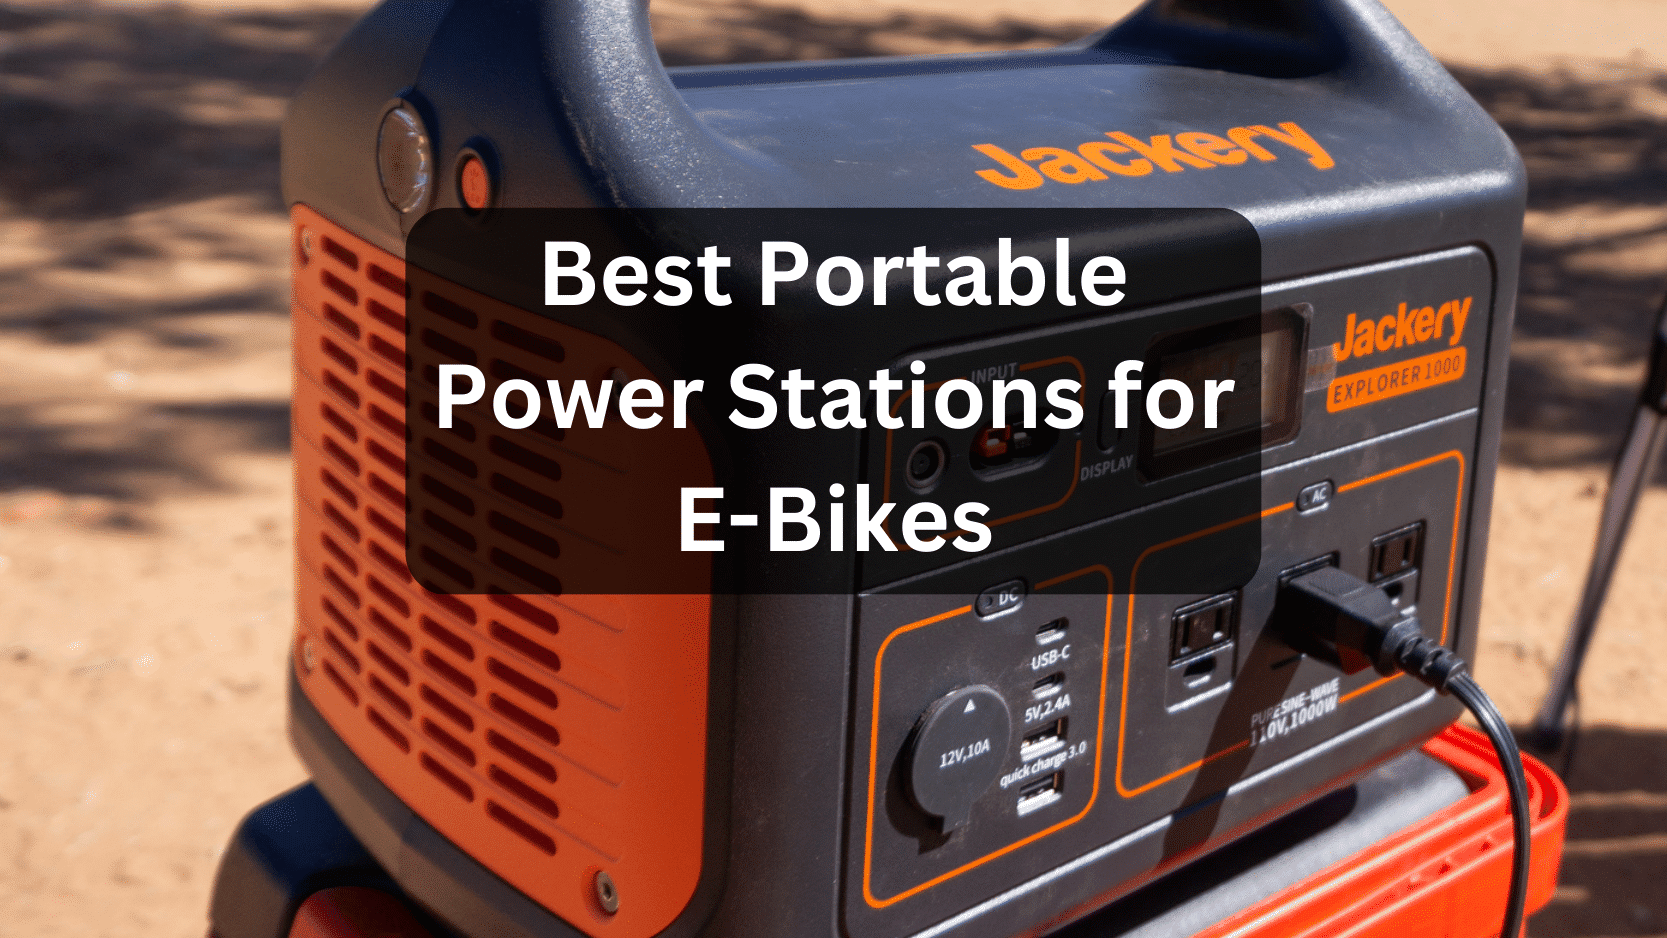 Best Power Station for E-Bikes for Energizing Your Adventures